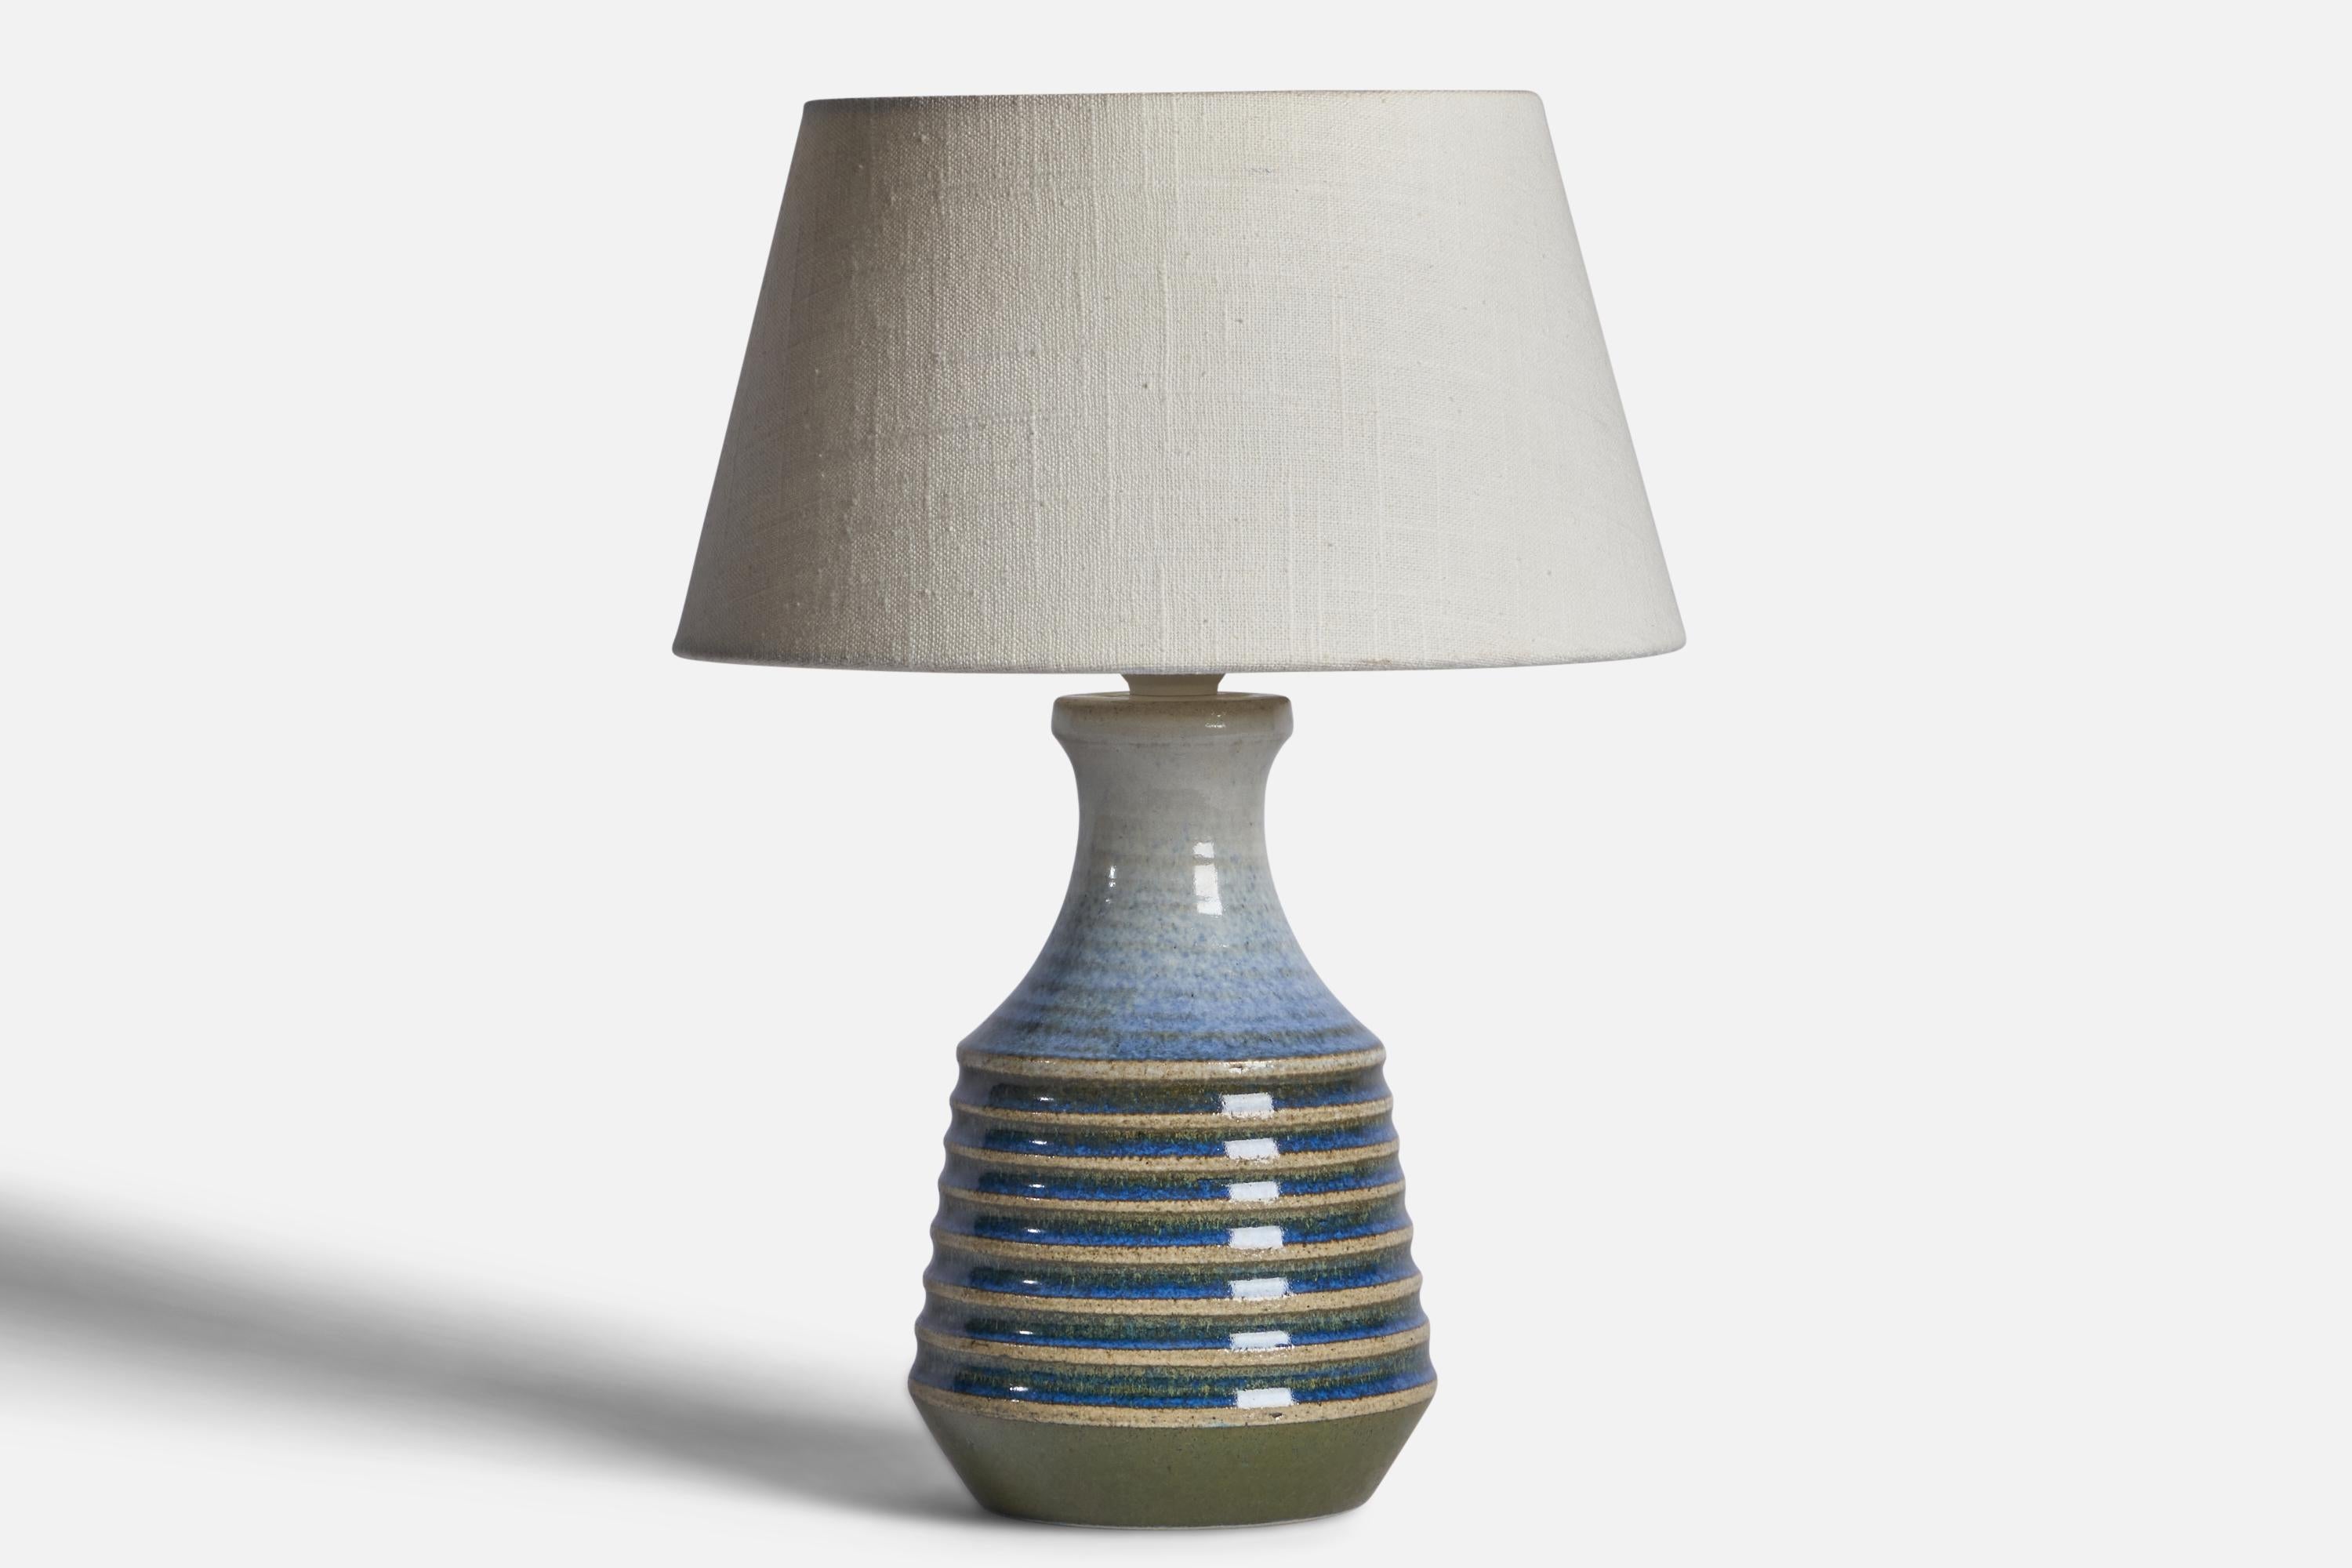 A unique blue and green-glazed stoneware table lamp designed by Heinz Schlichting and produced by Ego Stengods, Sweden, c. 1960s.

Dimensions of Lamp (inches): 11” H x 5.25” Diameter
Dimensions of Shade (inches): 7” Top Diameter x 10” Bottom